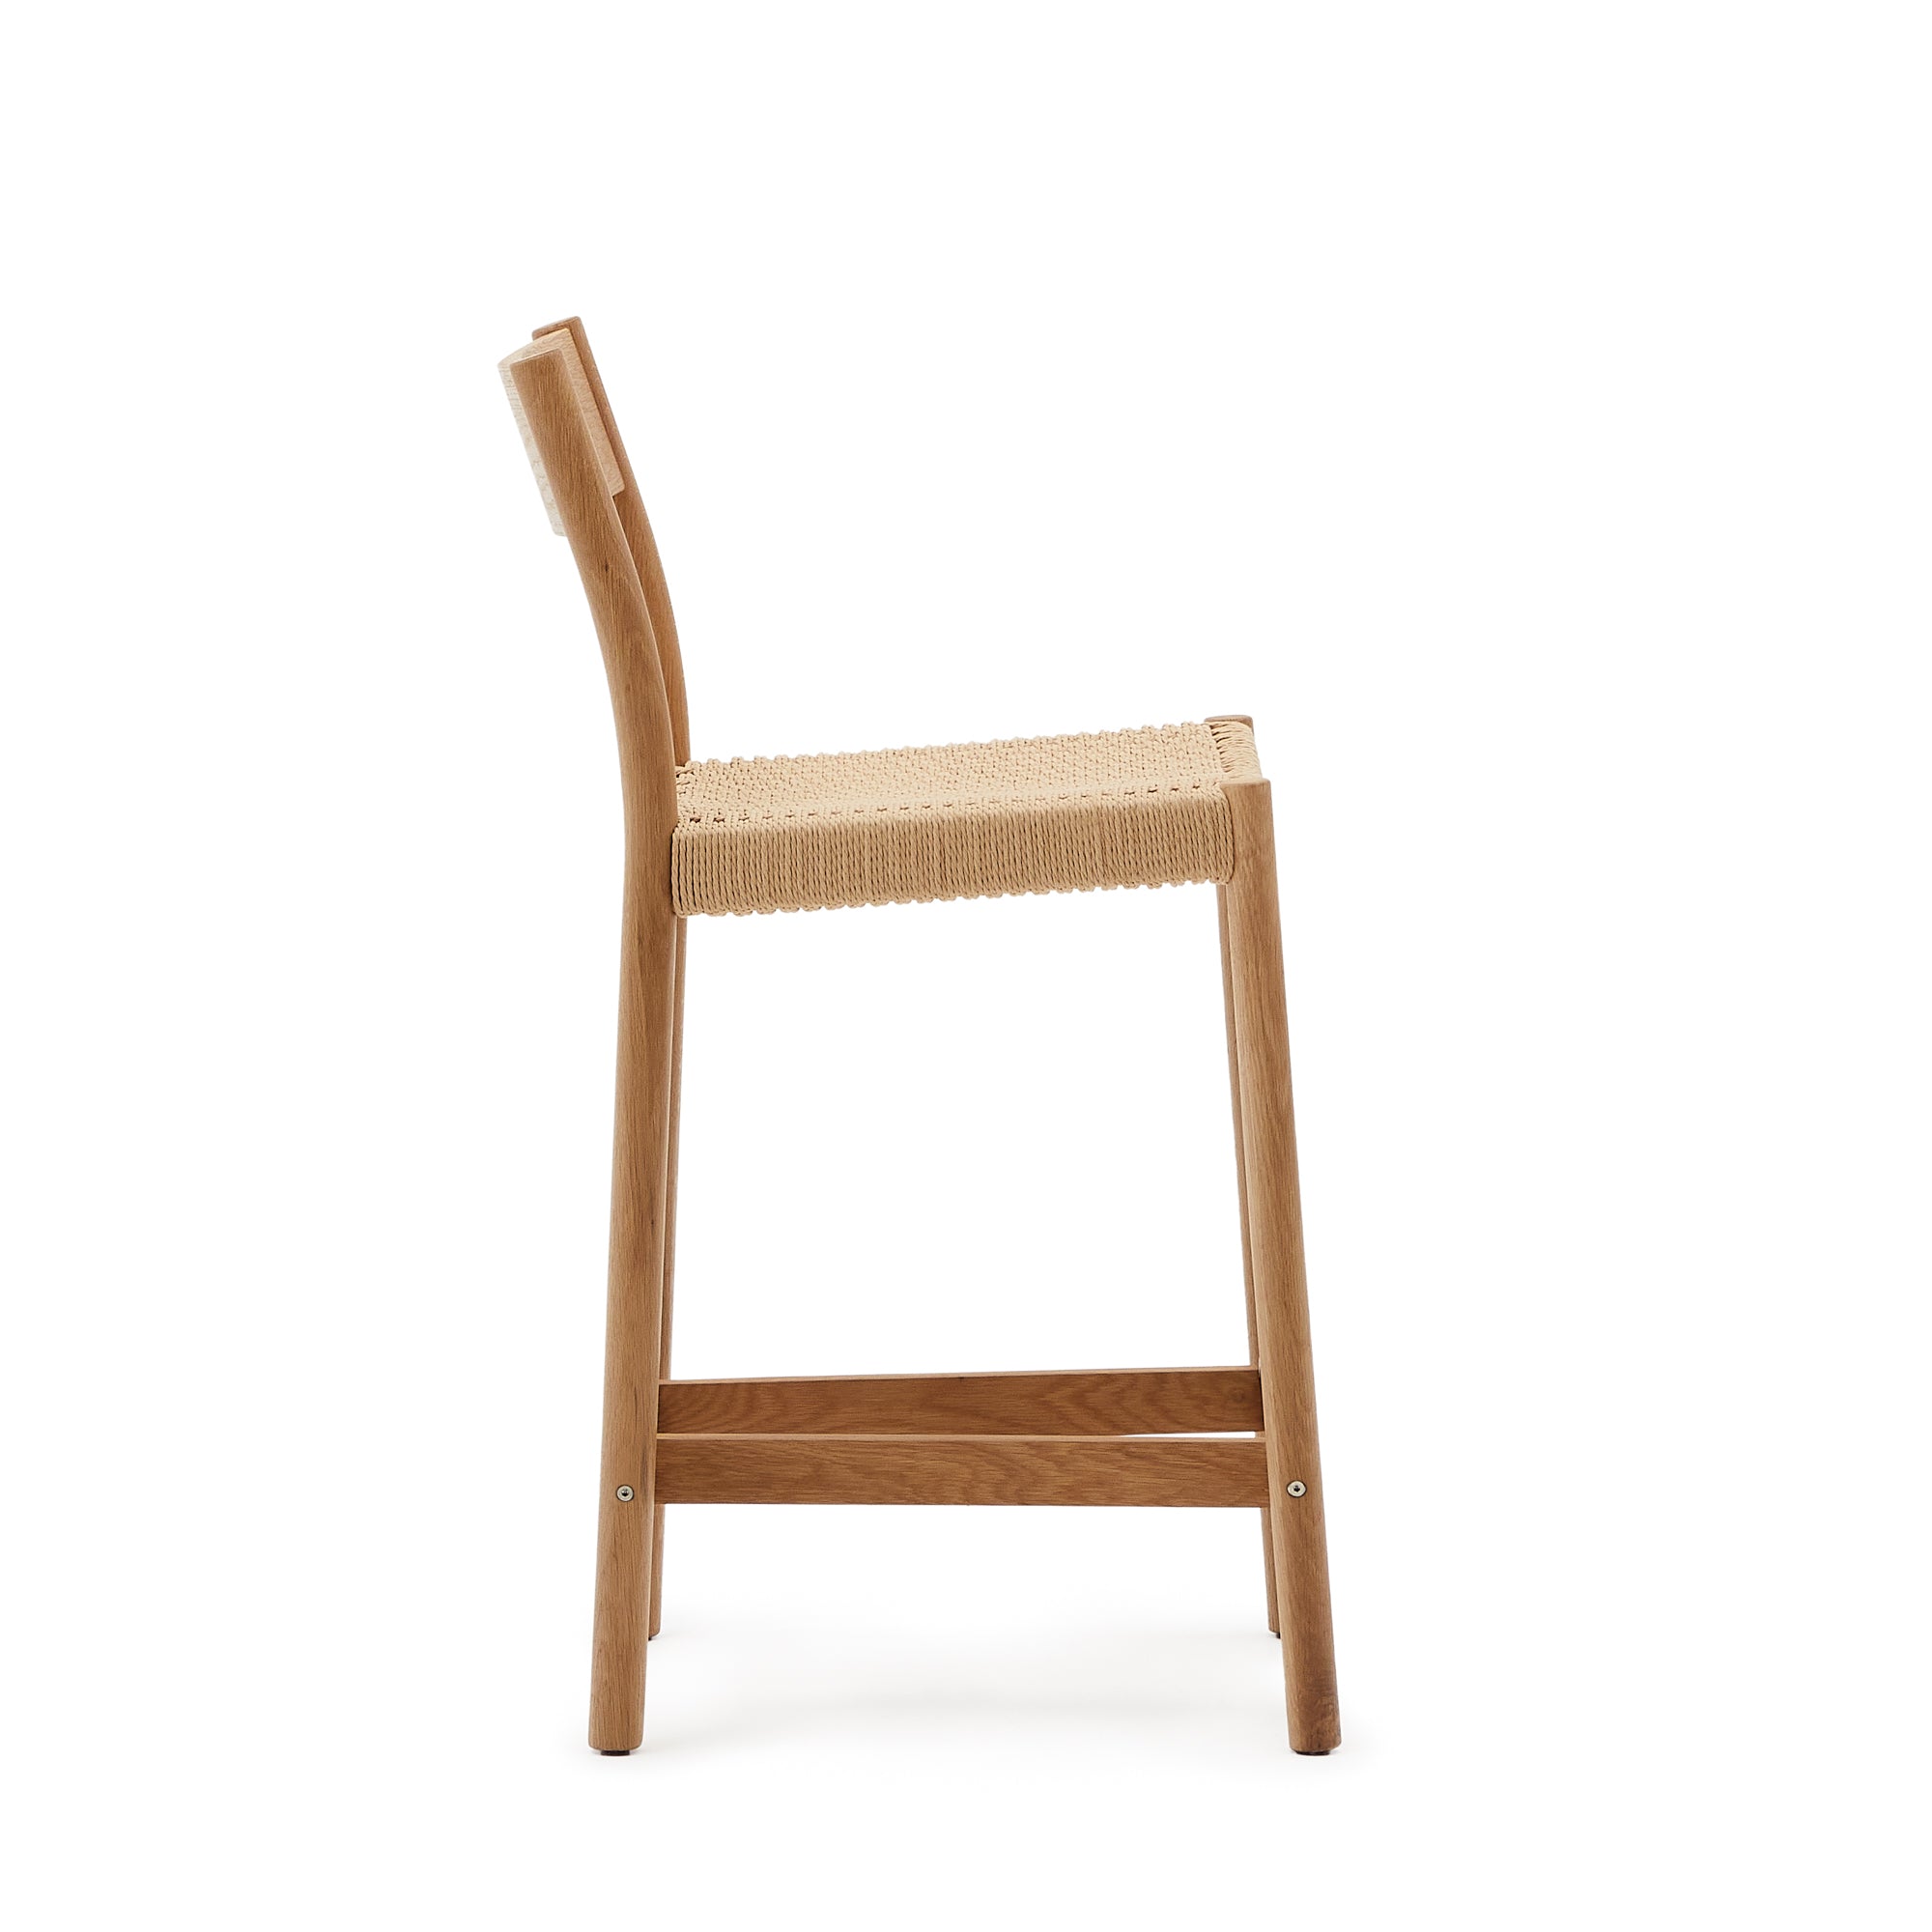 Yalia chair with back, solid oak with natural finish and rope seat, 65 cm 100% FSC